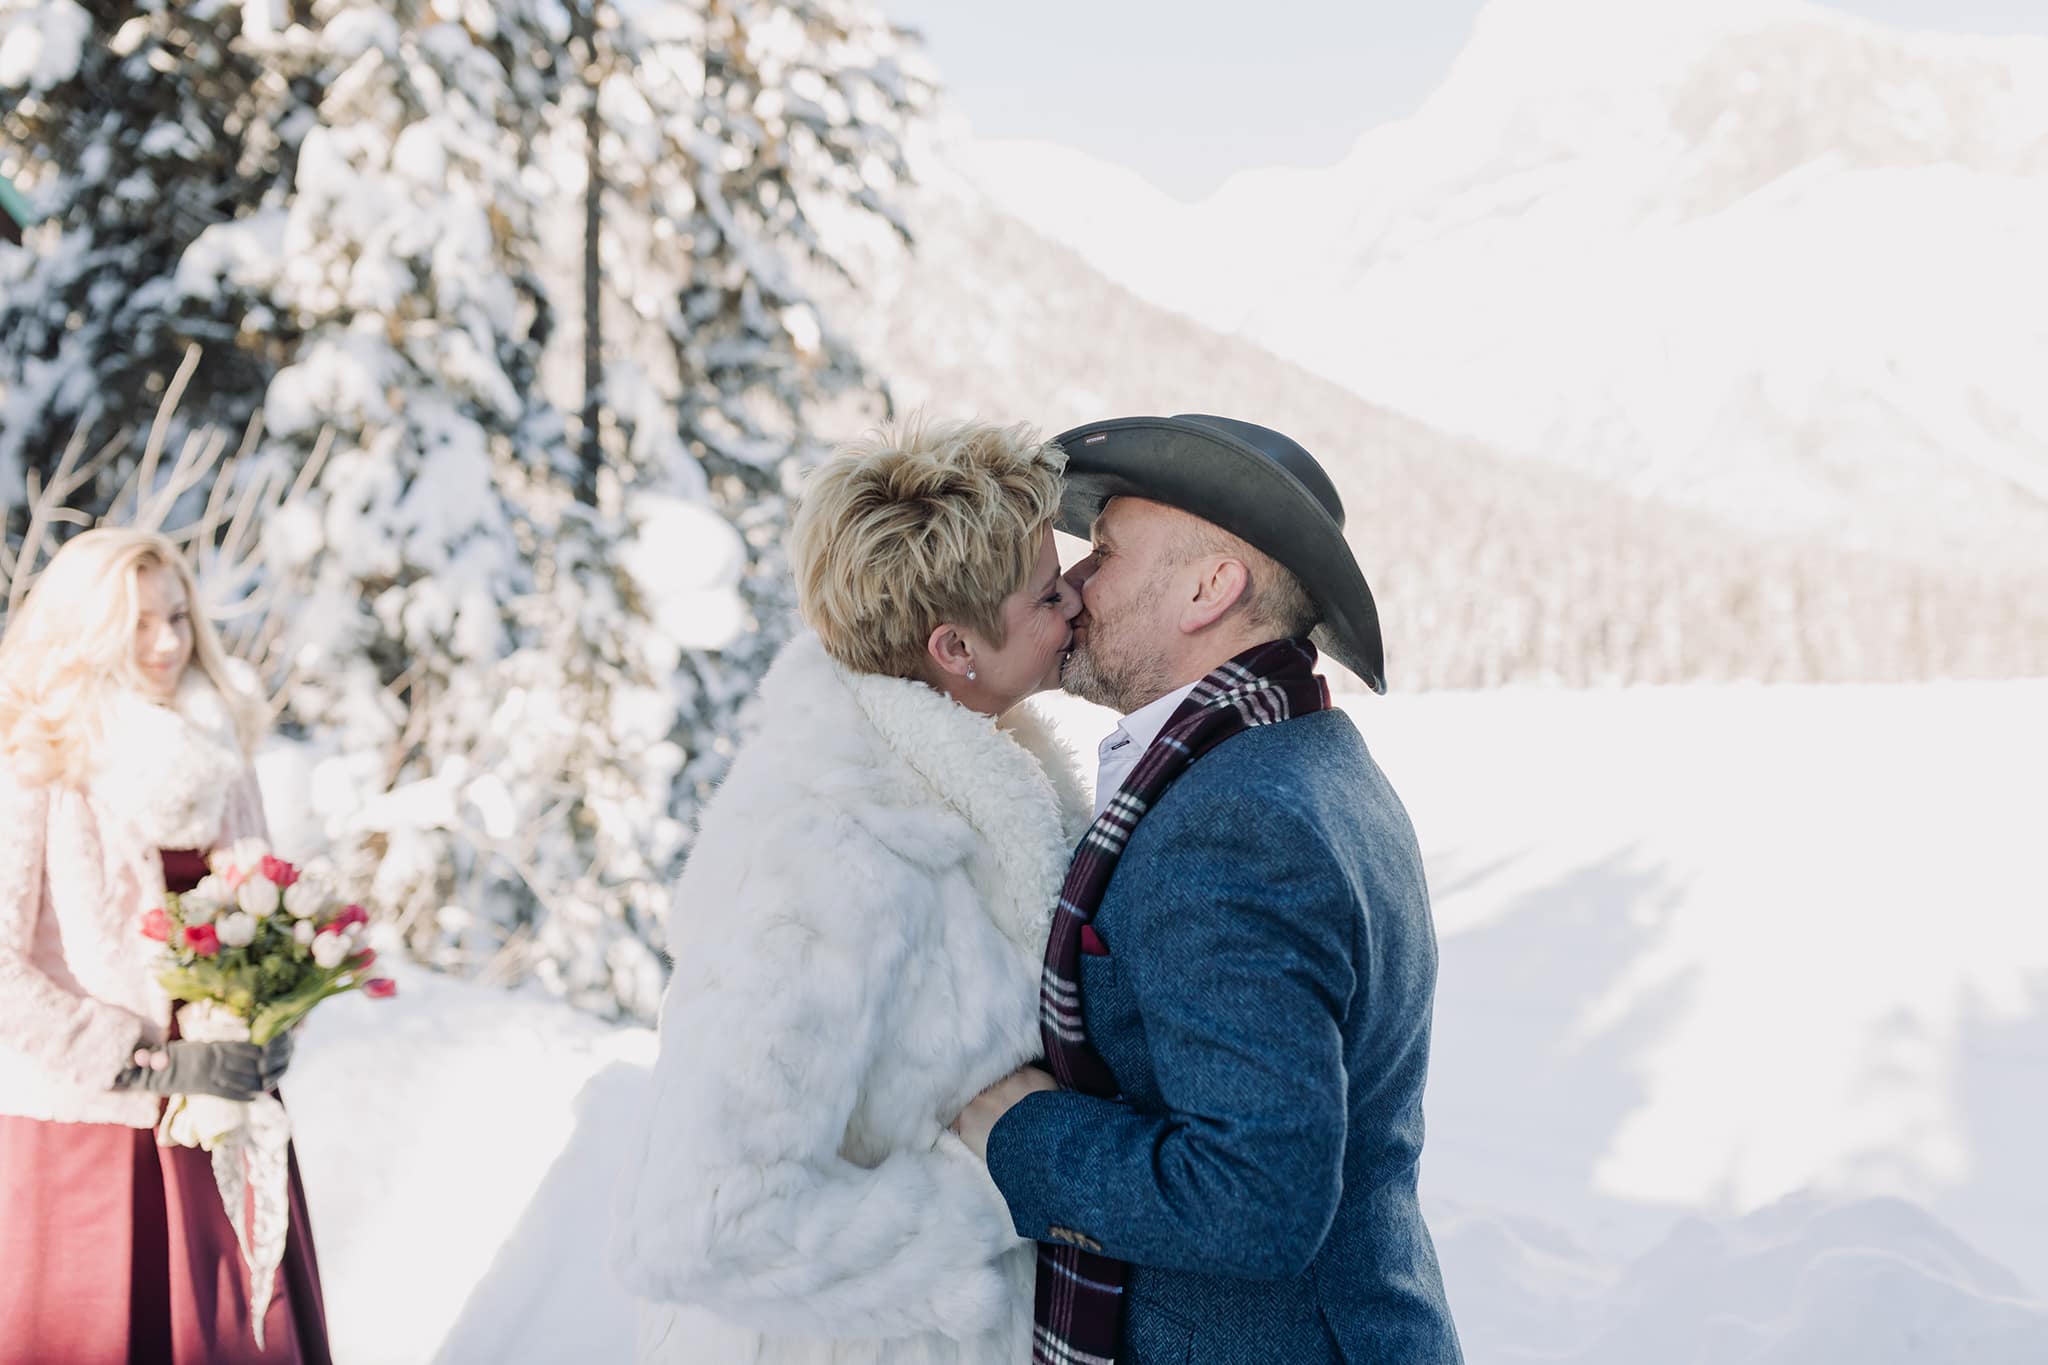 New Years Eve Elopement at Emerald lake Lodge ceremony